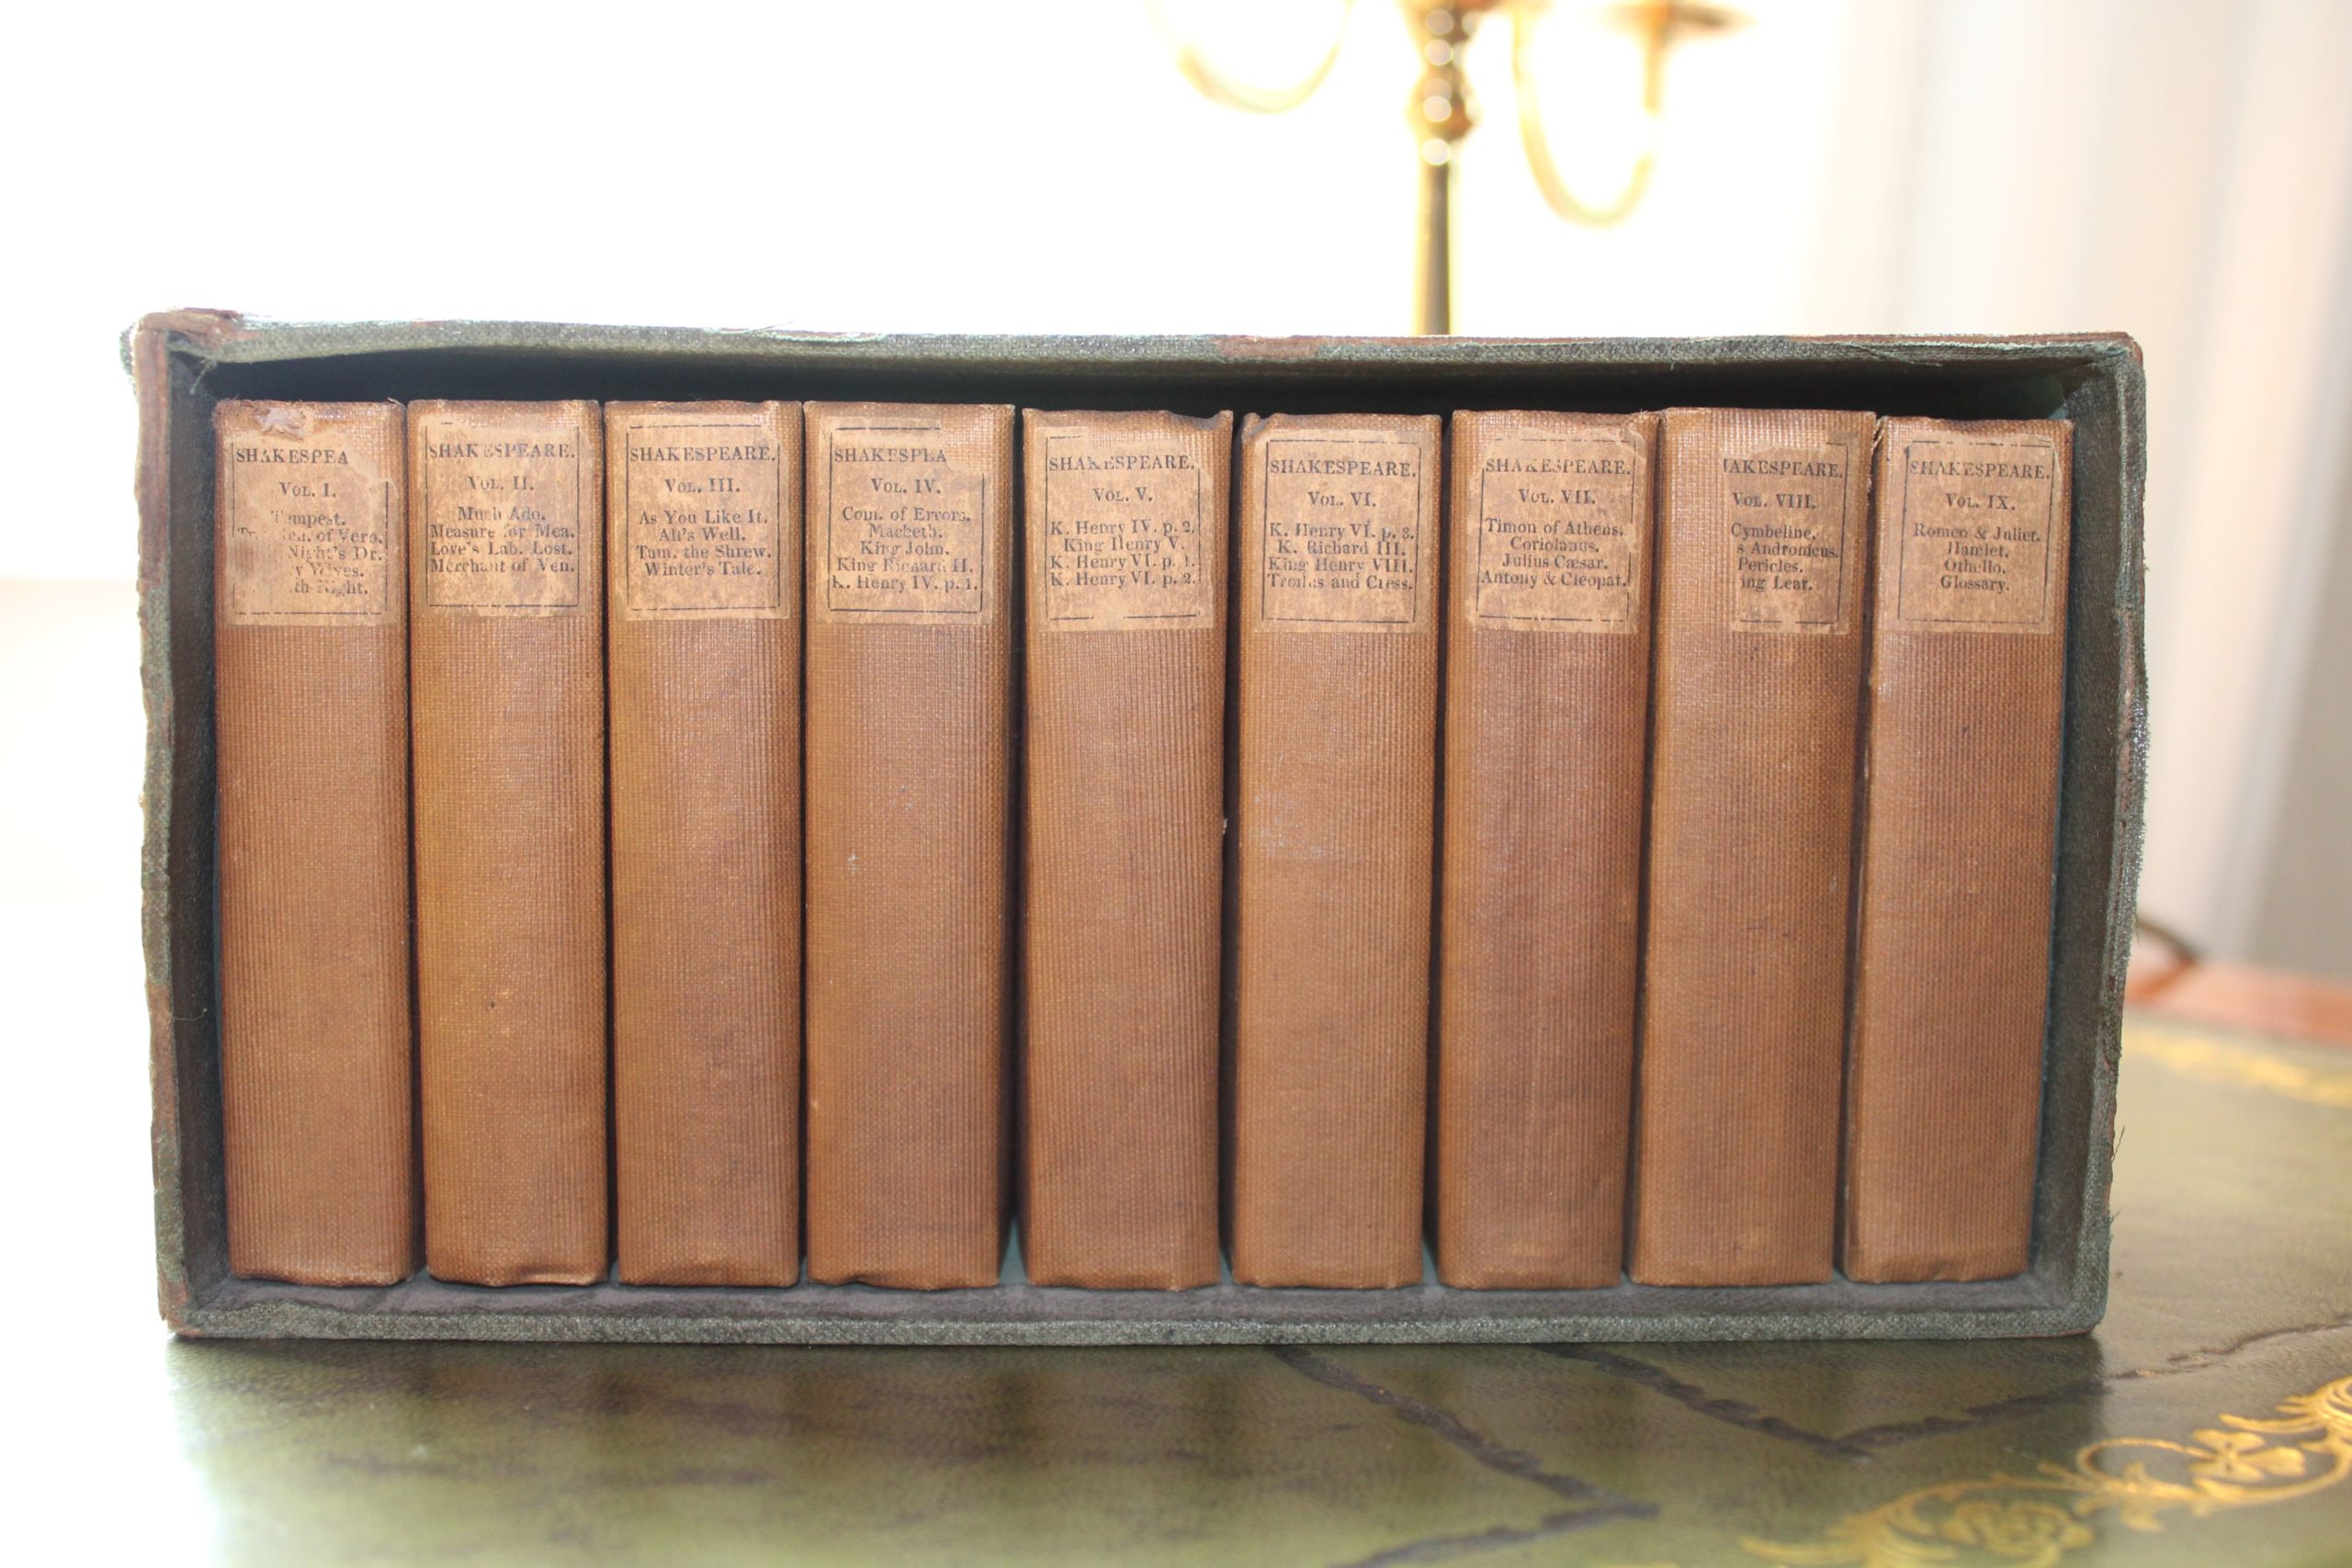 William Shakespeare Collected works